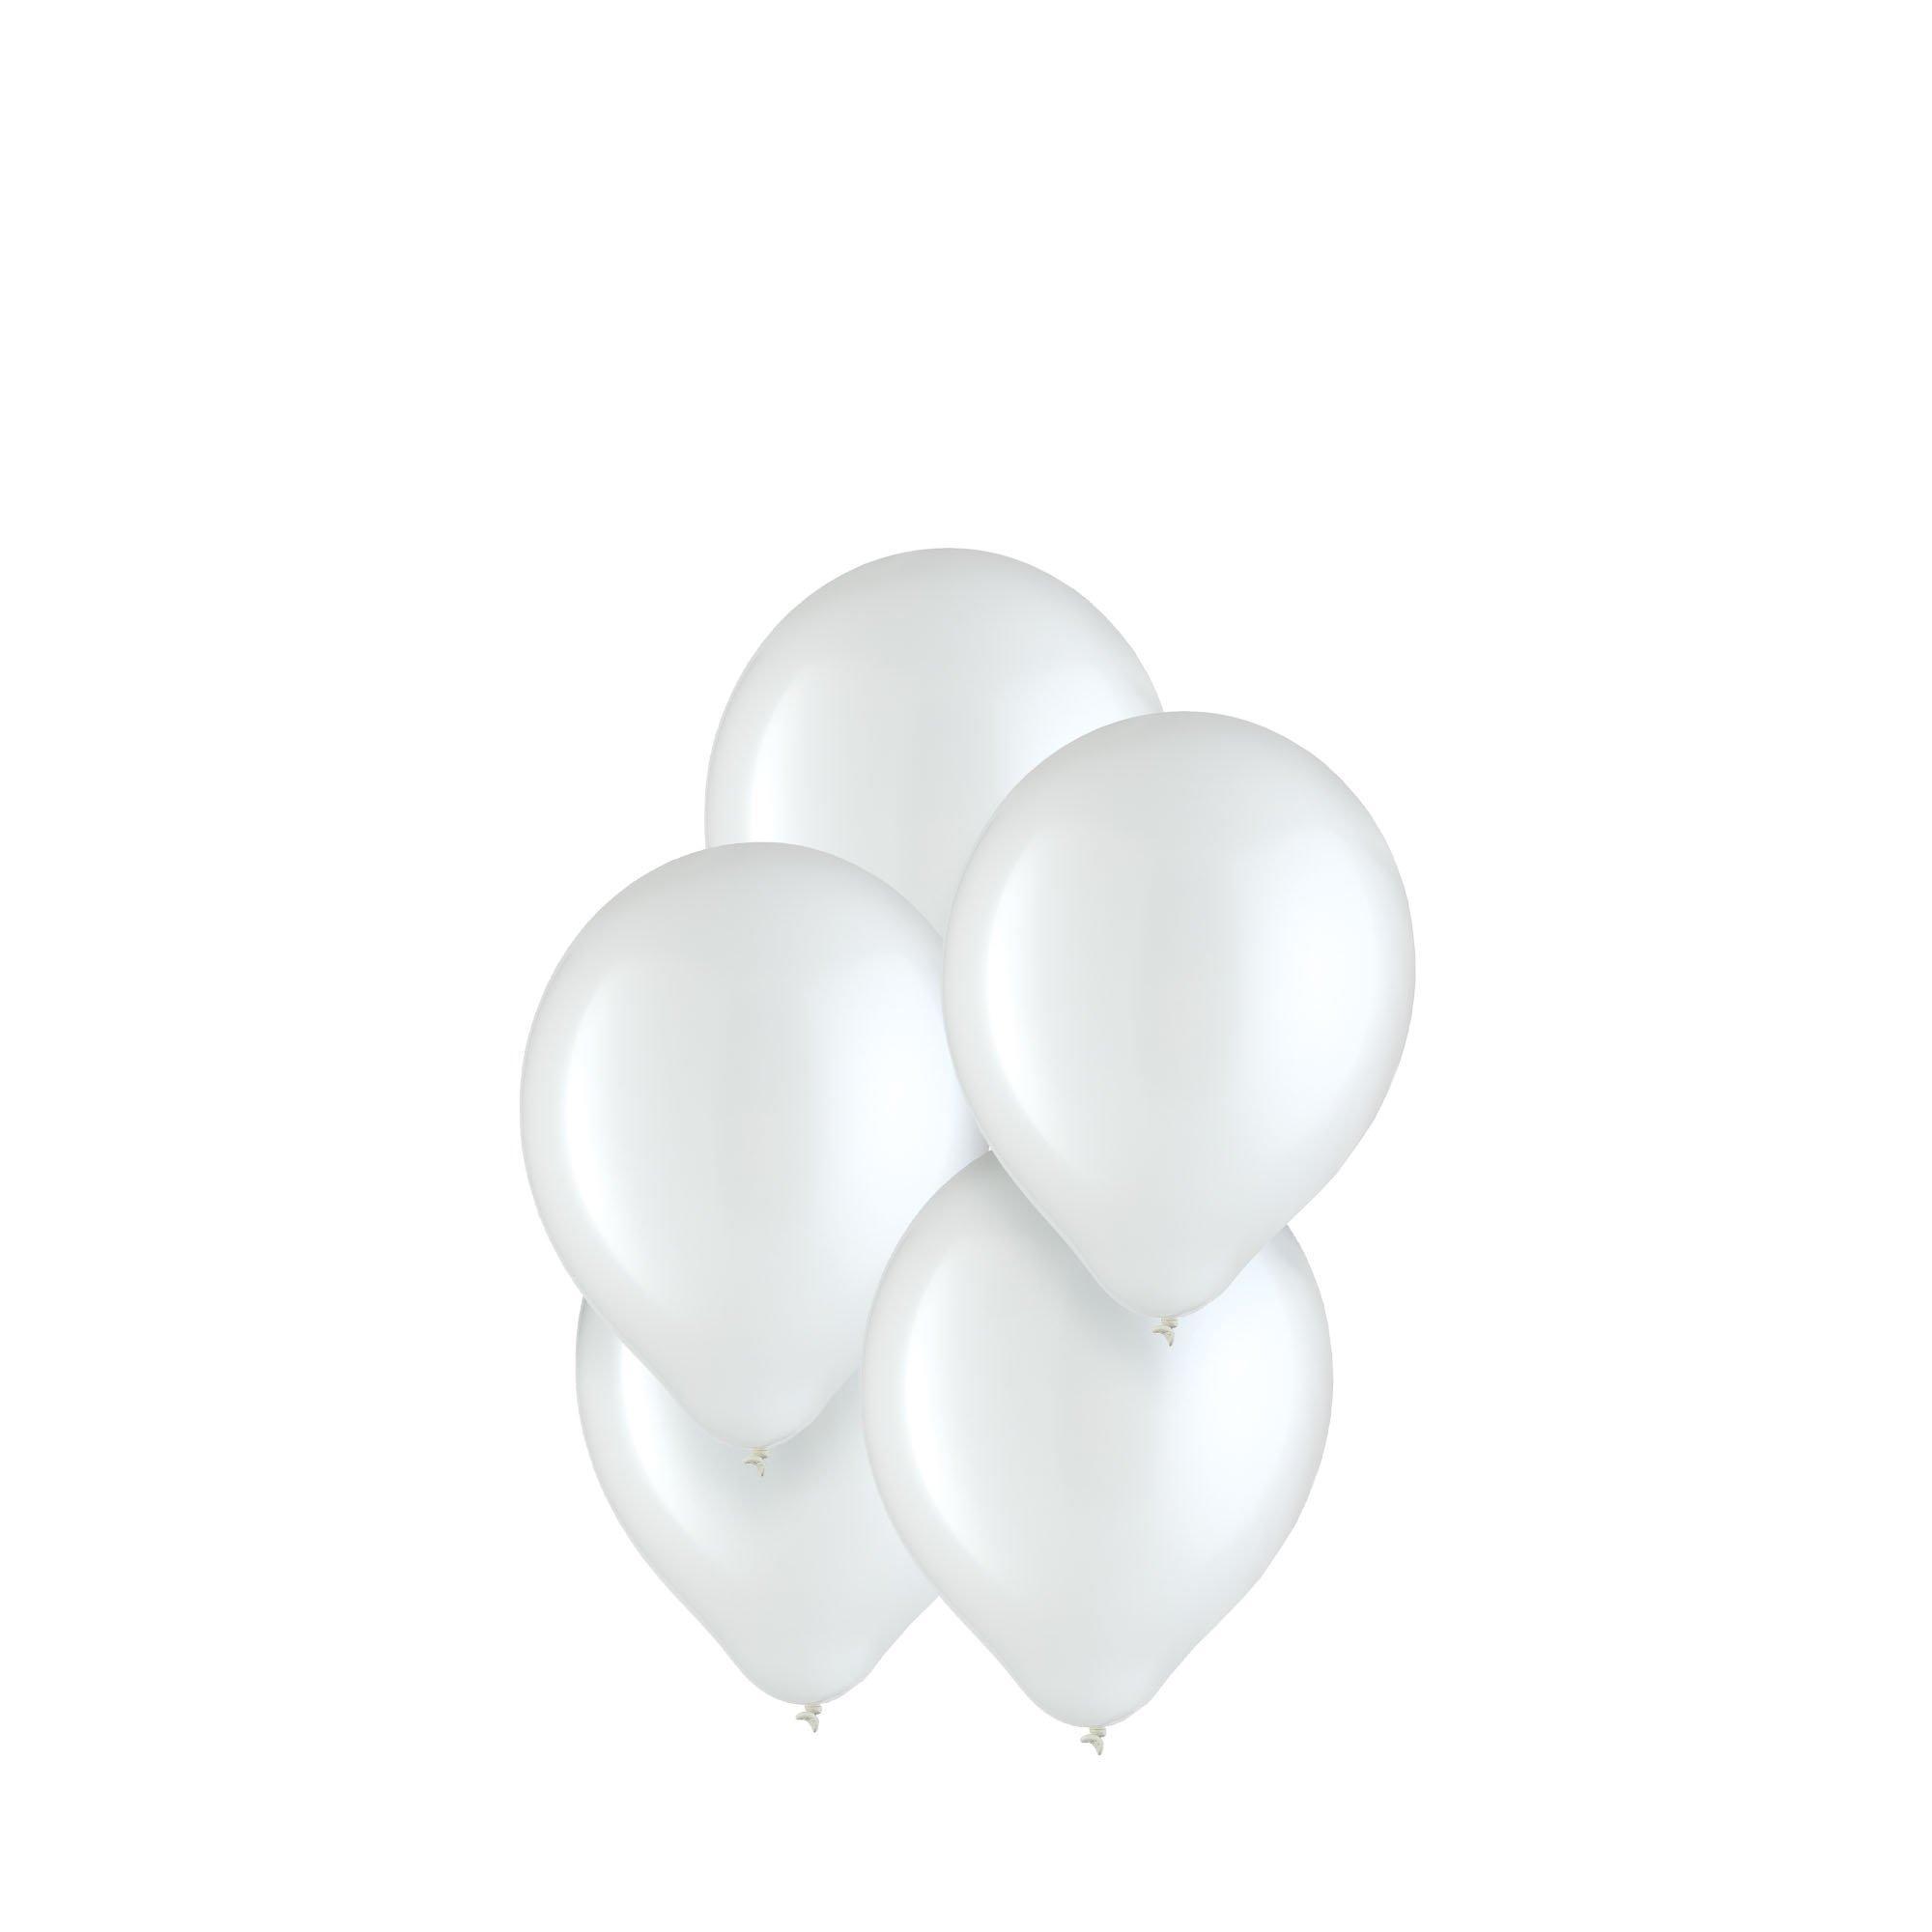 Pink and White Balloons for Birthday Decorations - Pack of 75